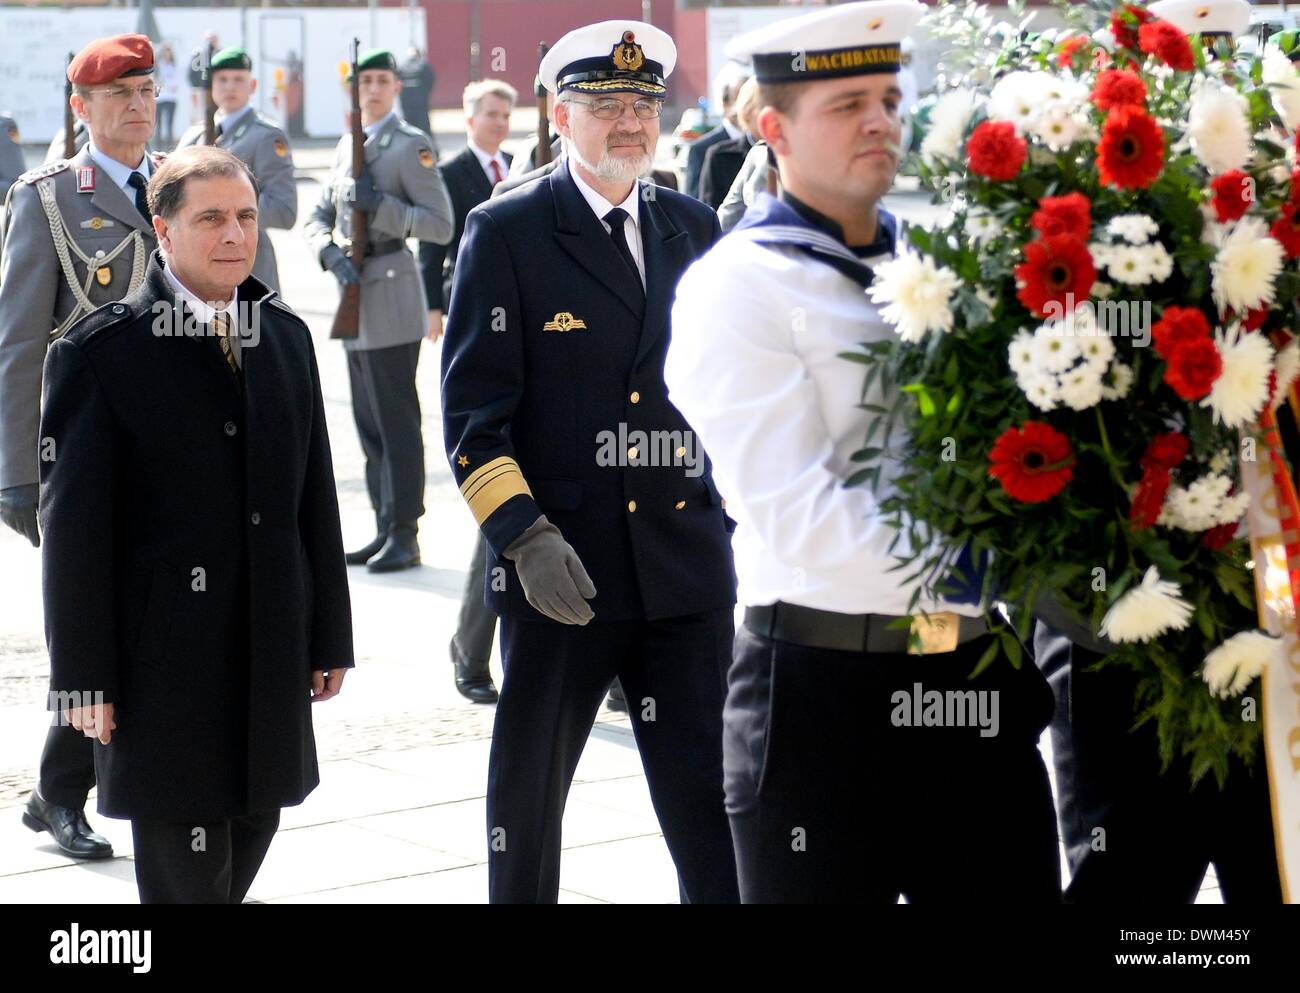 Maltese President George Abela (L) and Admiral Heinrich Lange arrive at the Central Memorial of the Federal Republic of Germany for the Victims of War and Dictatorship to lays down a wreath in the Neue Wache (New Guardhouse) in Berlin, Germany, 11 March 2014. Photo: BRITTA PEDERSEN/dpa Stock Photo